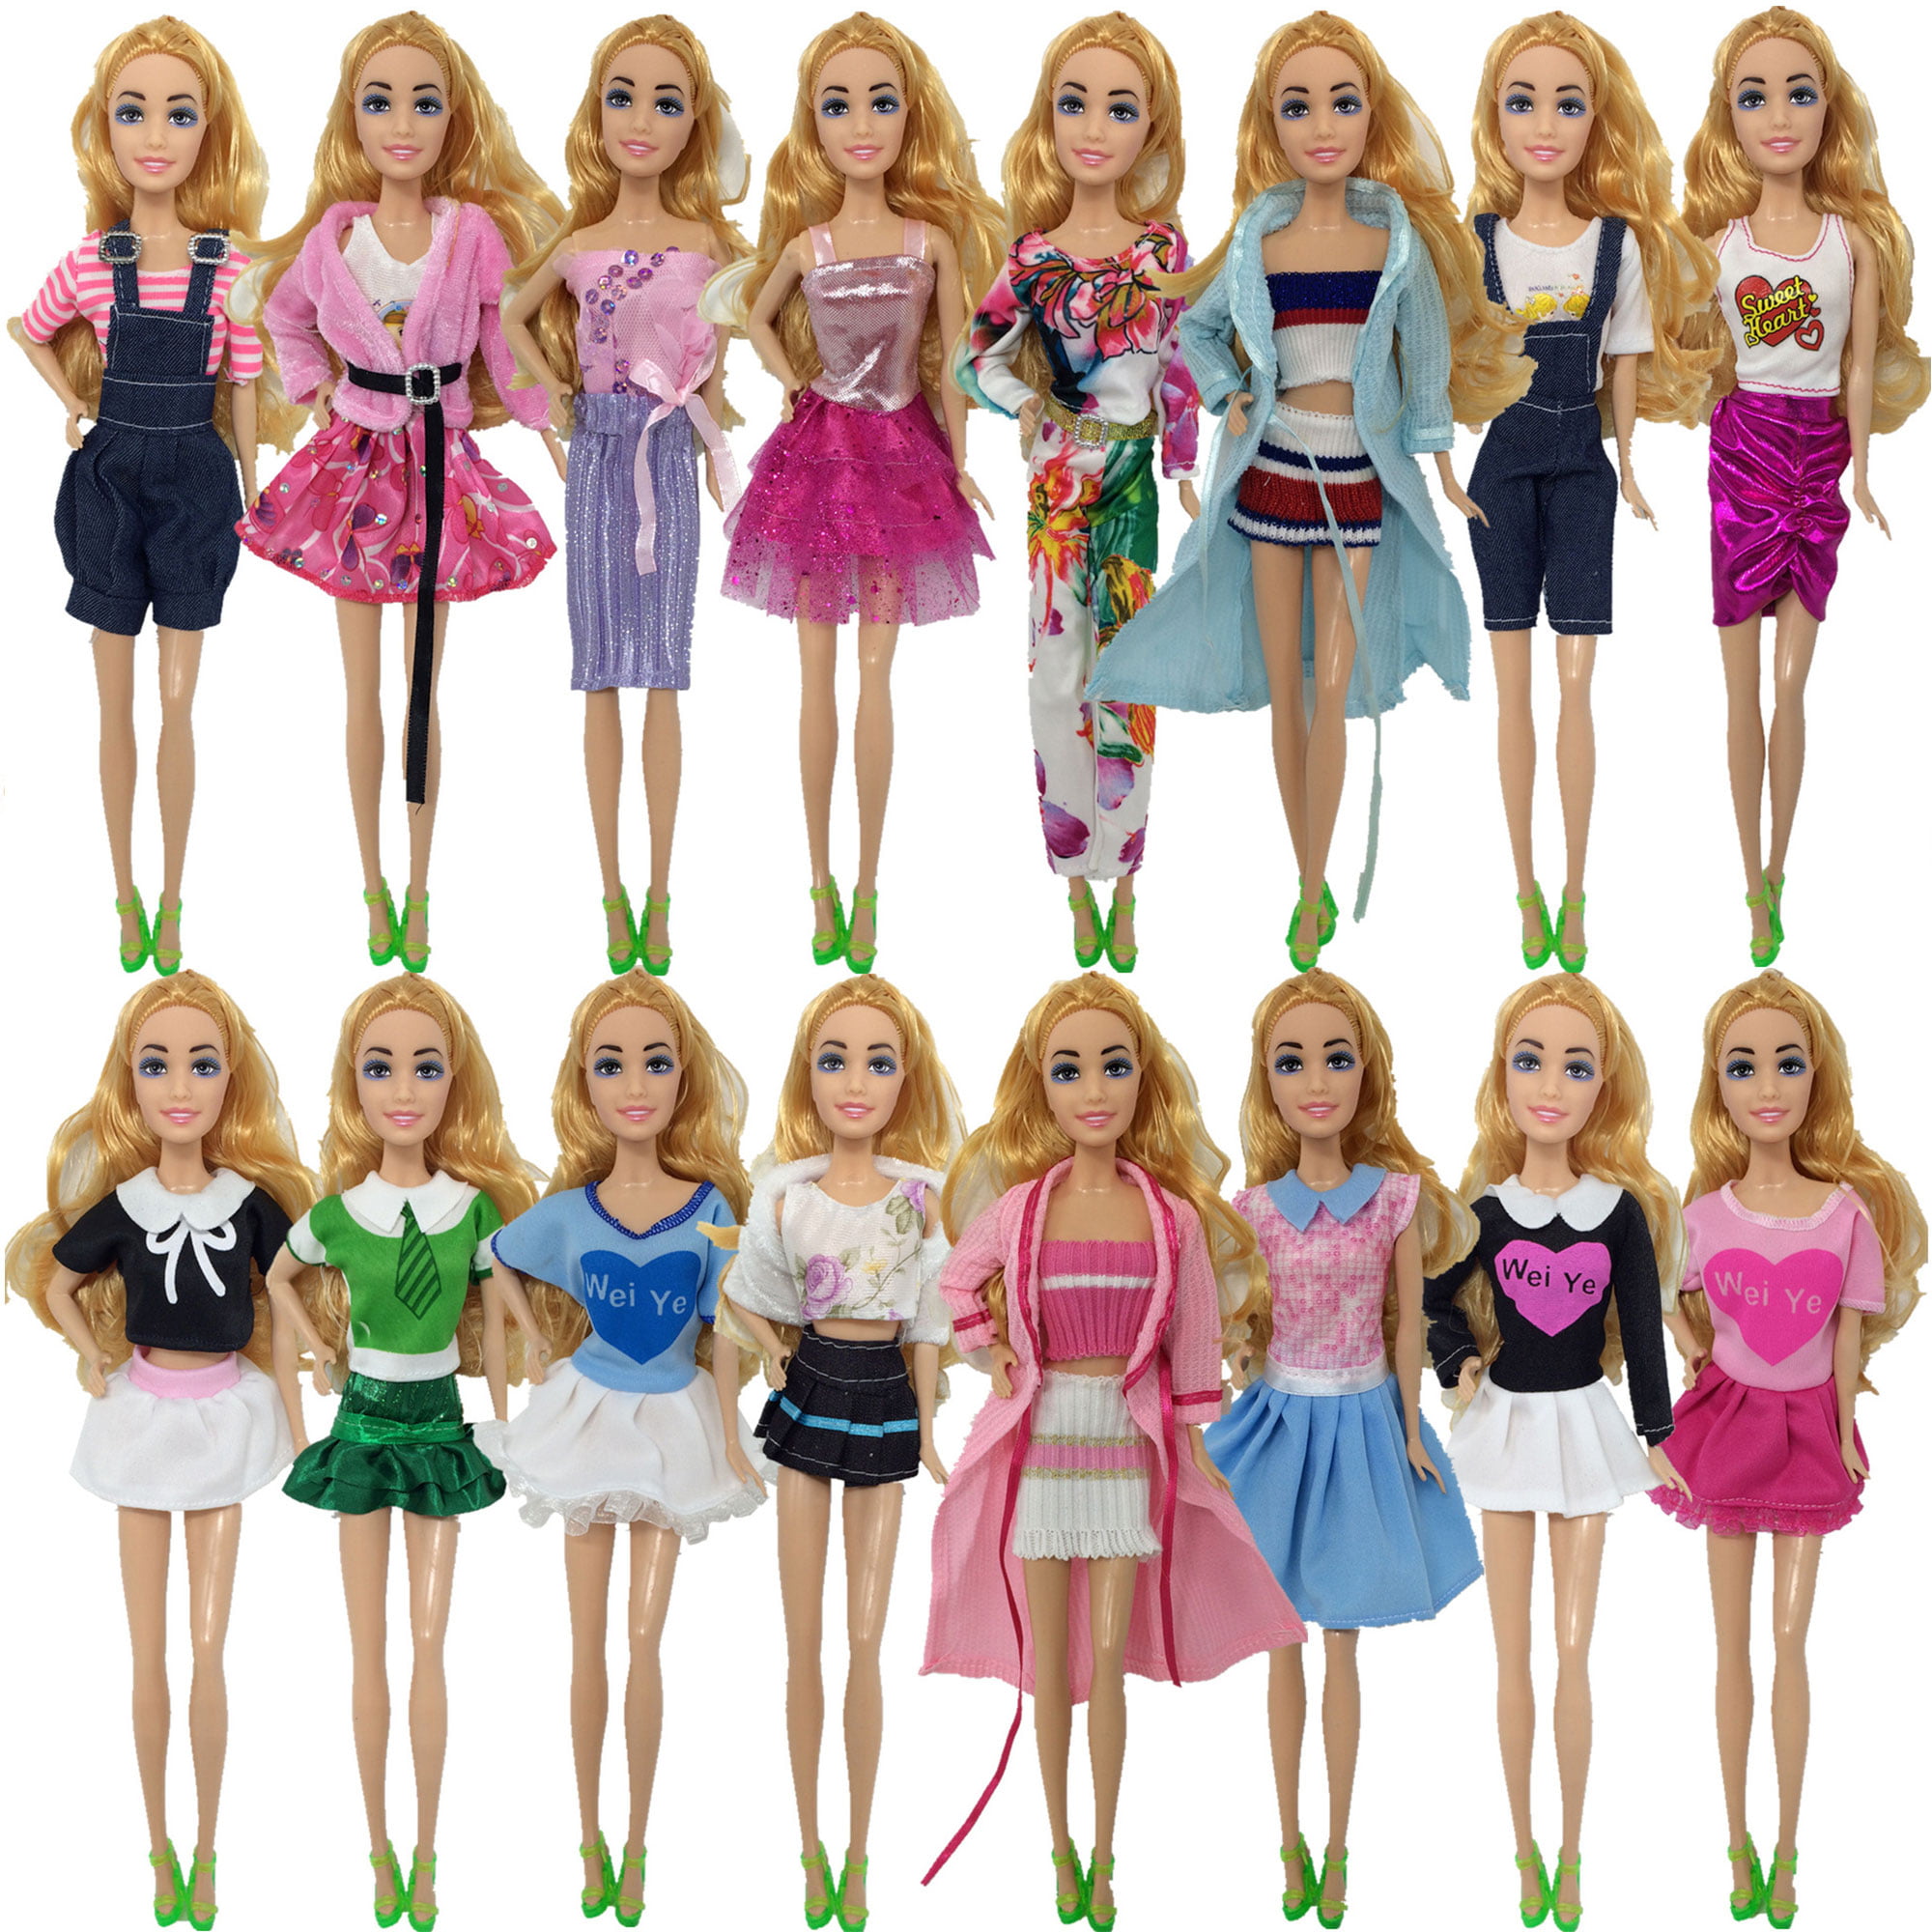 Handmade Fashionable Dance Clothing Set Dress Clothes Outfit Fashion Pack For Barbie Dolls Set